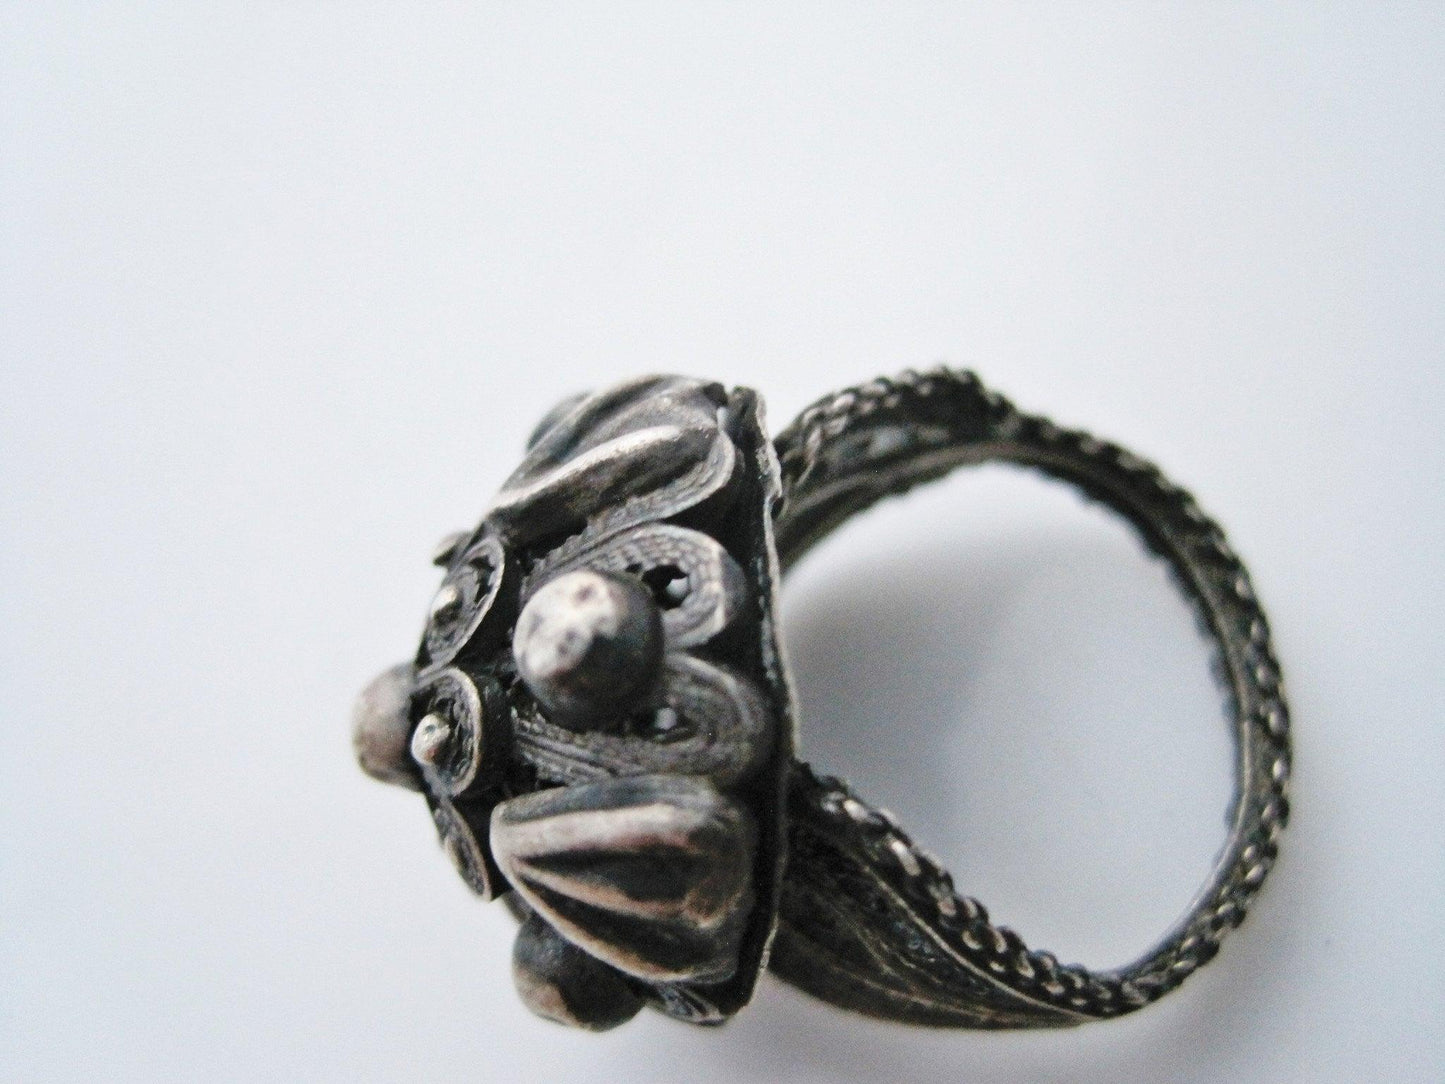 Vintage Ethnic Etruscan Style Silver Filigree Dome Ring - Anteeka